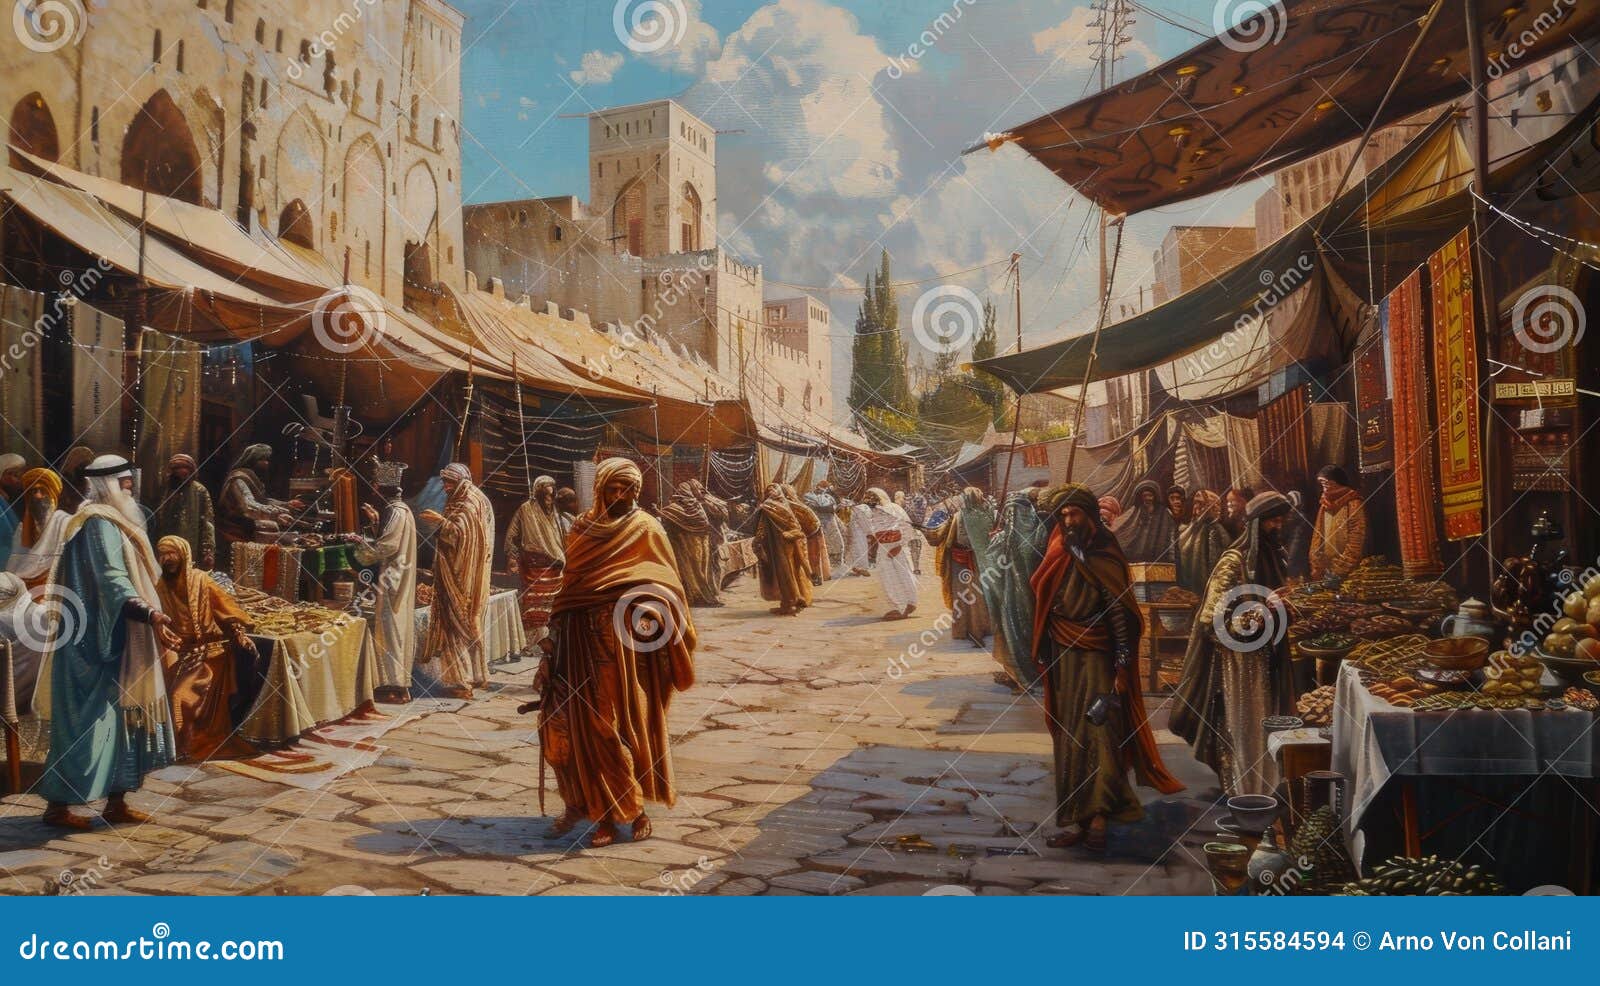 bustling bazaars: vibrant marketplace of 12th century baghdad